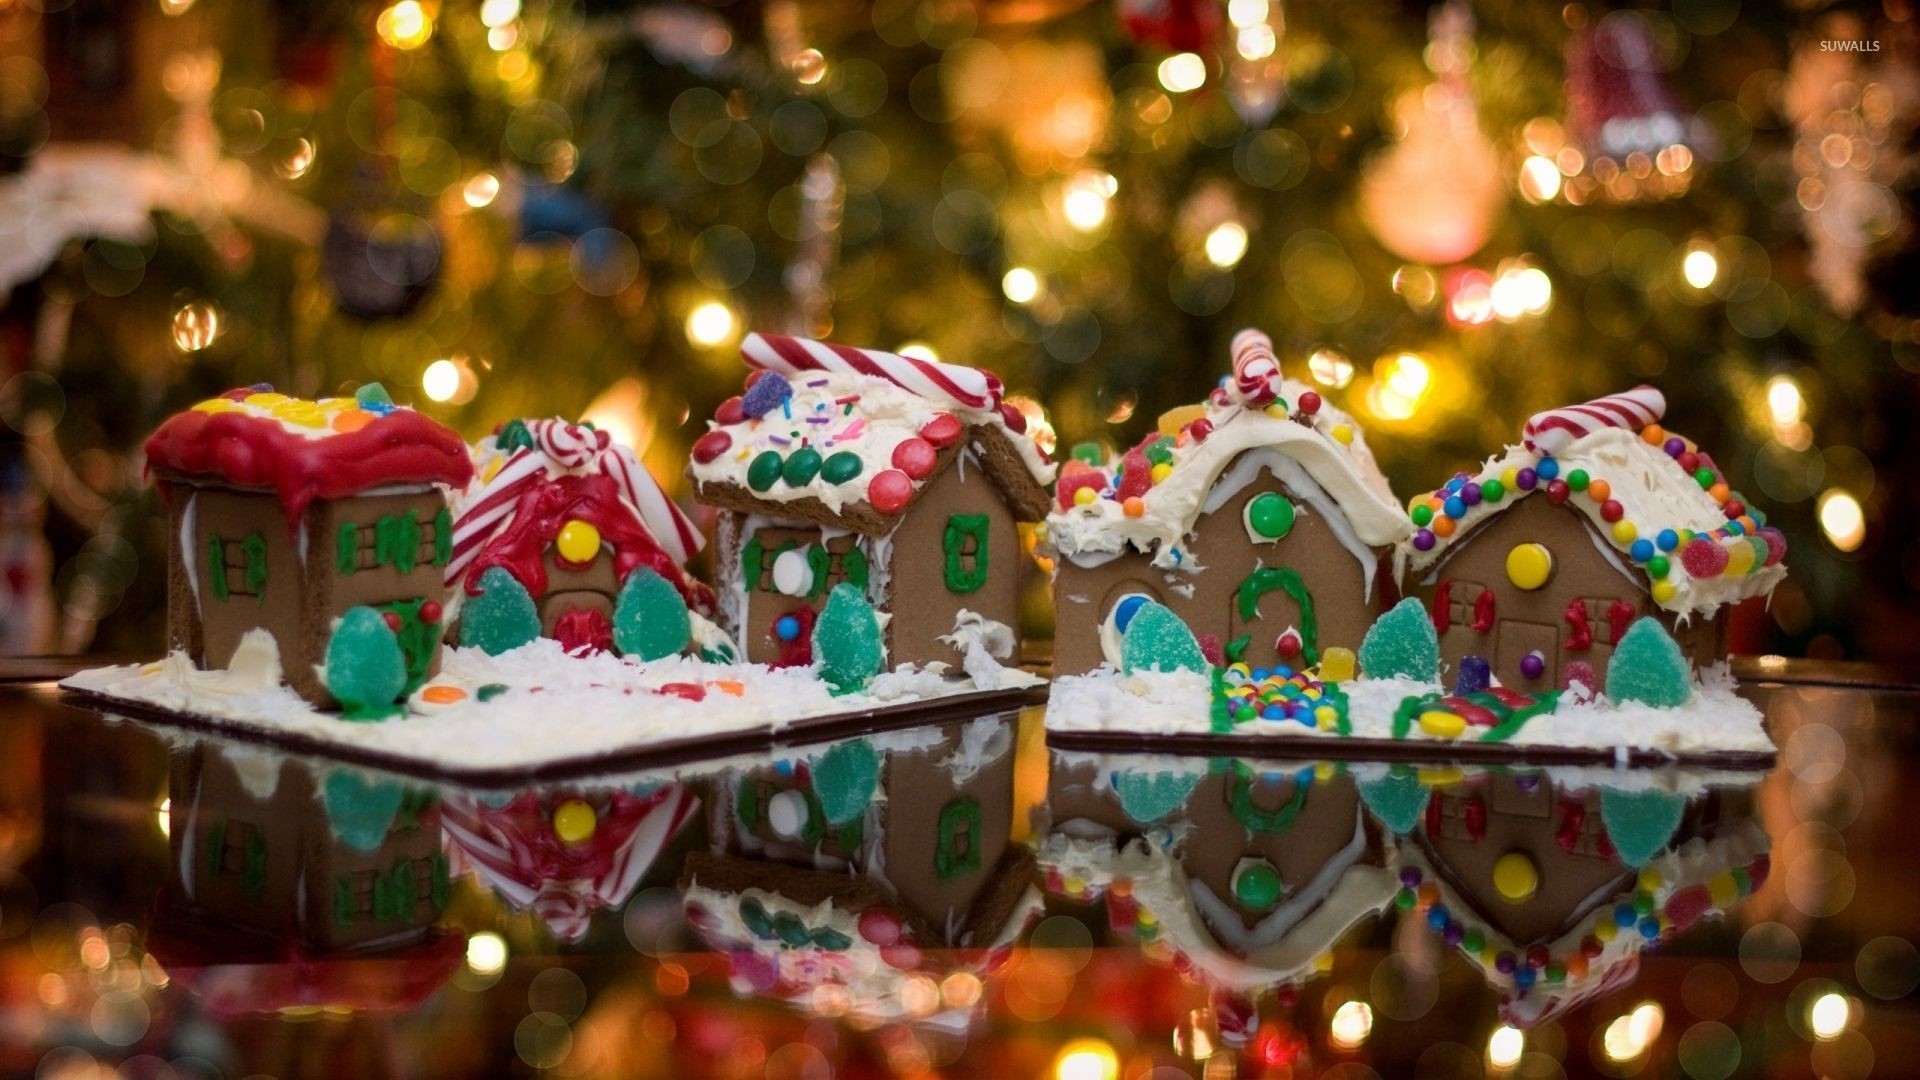 1920x1080 Gingerbread houses in front of the Christmas tree wallpaper